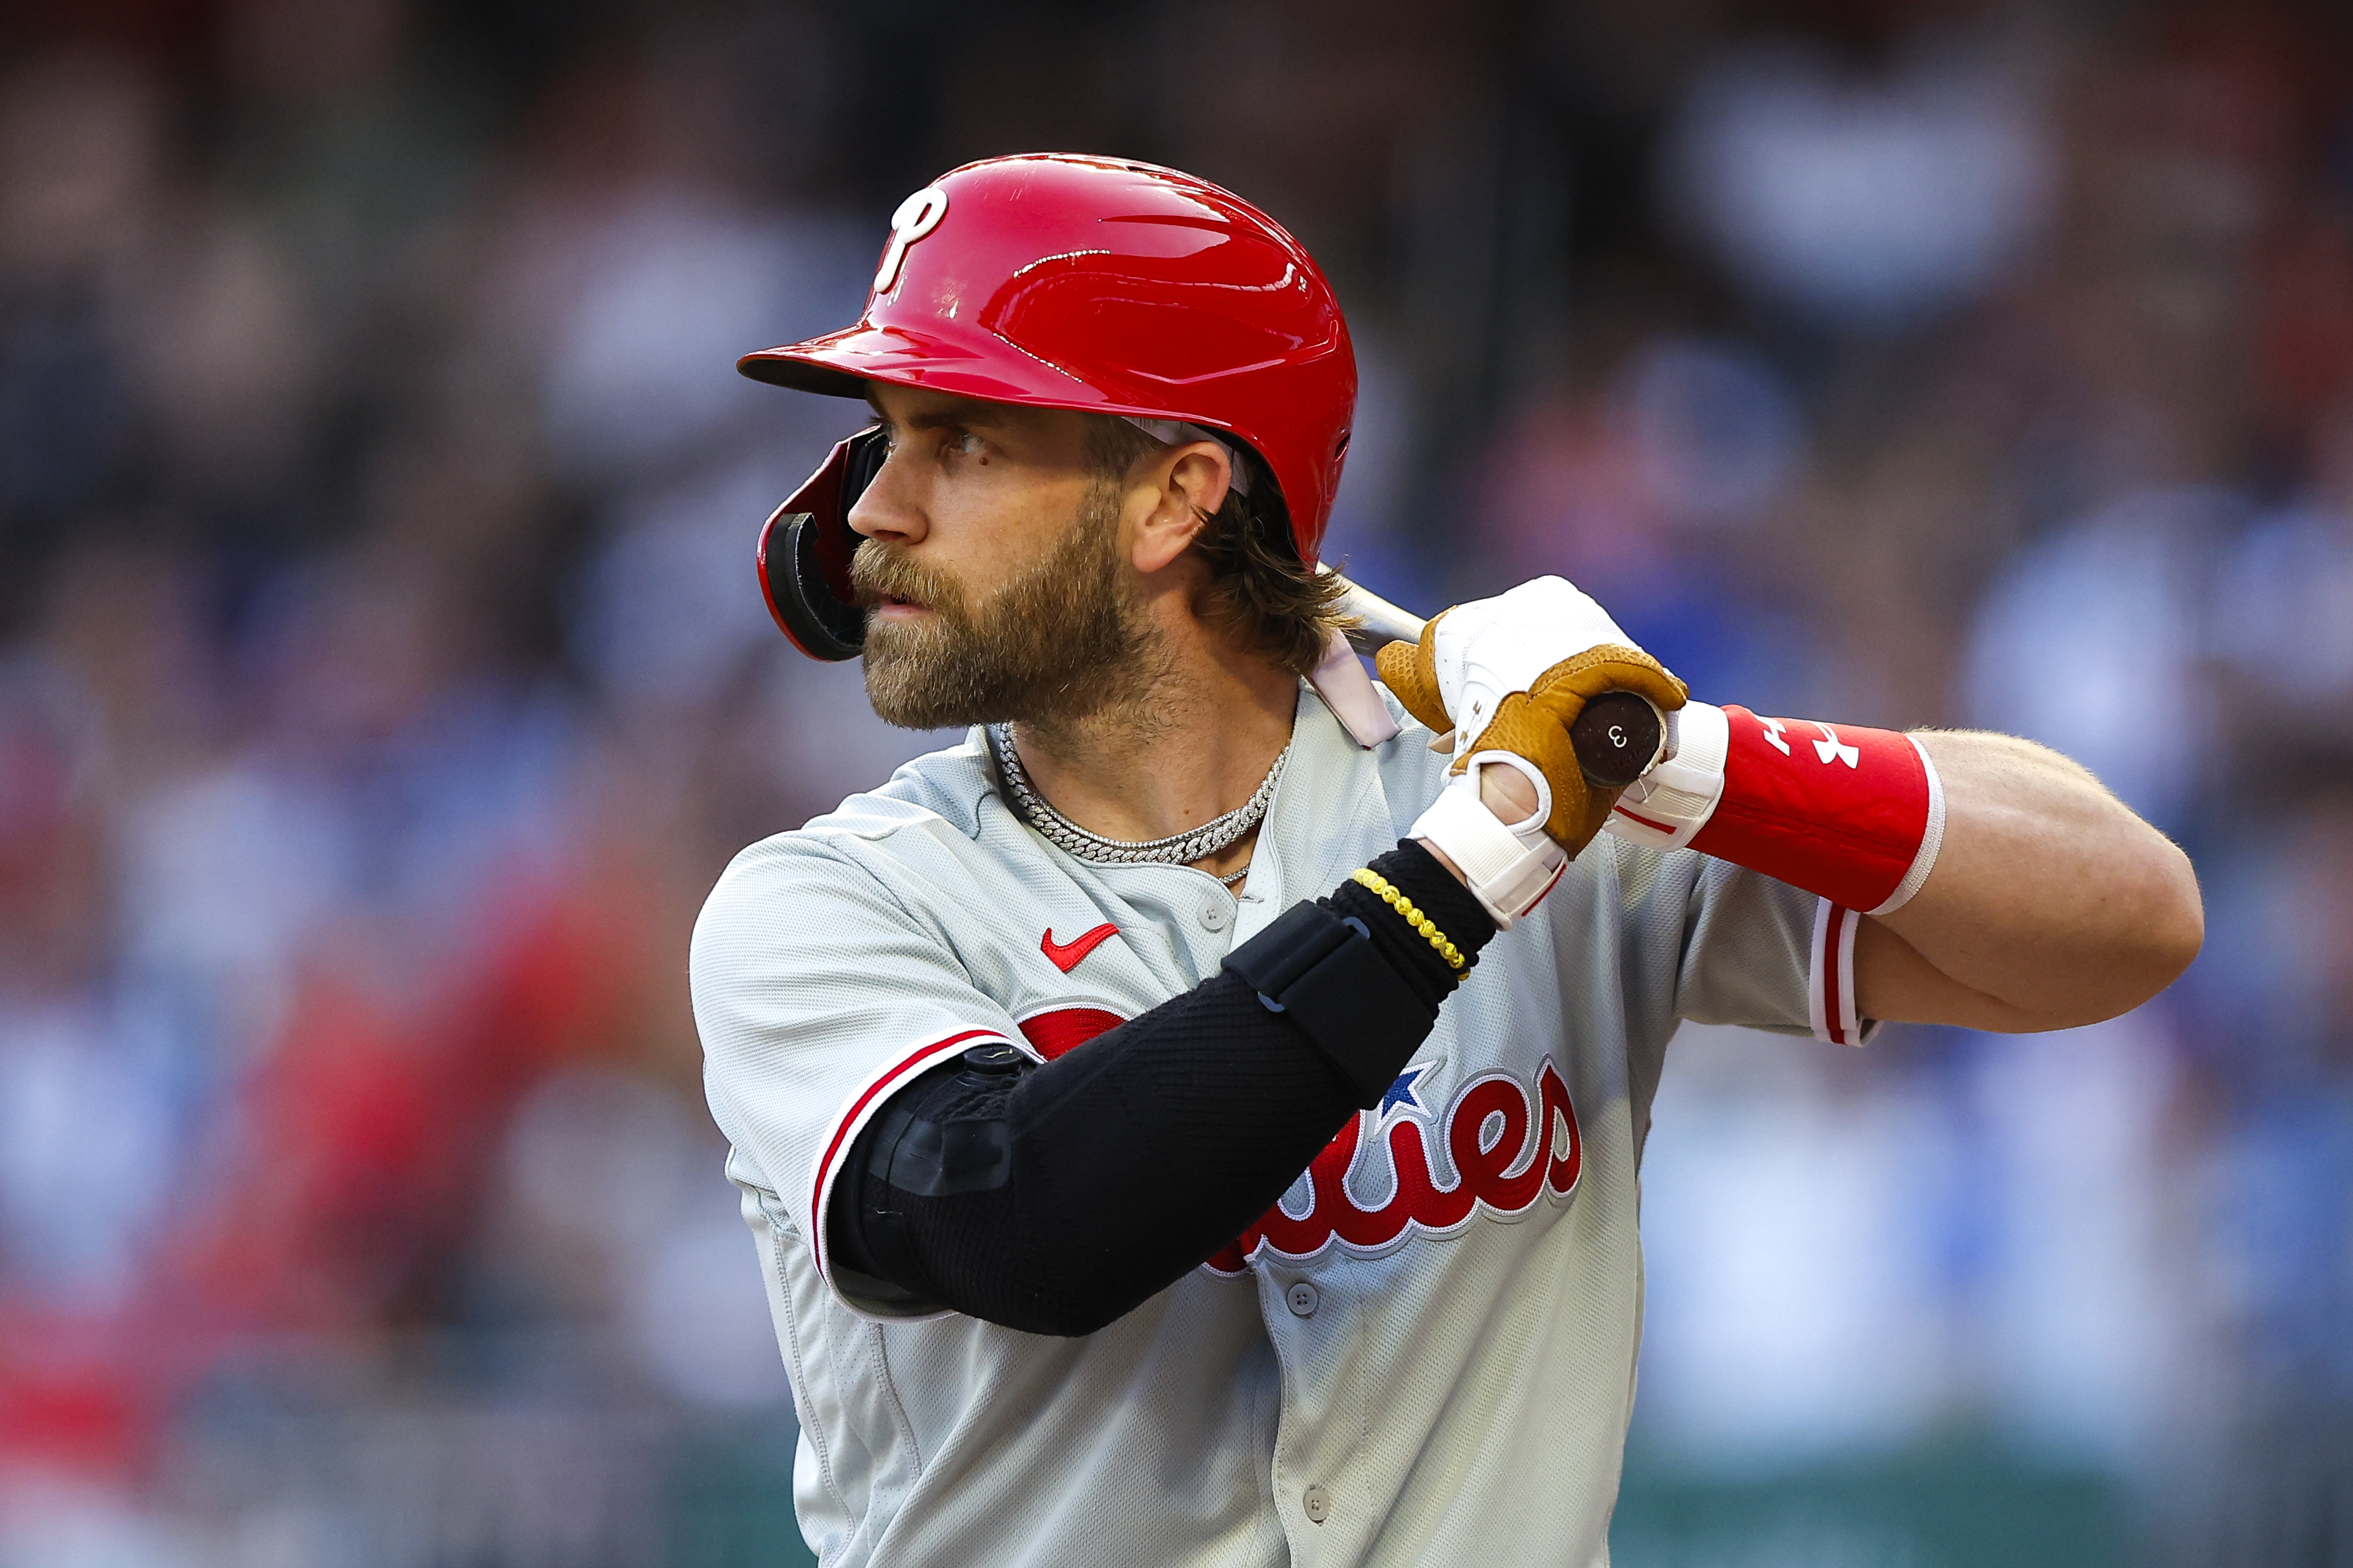 Bryce Harper of the Philadelphia Phillies bats during the third inning against the Atlanta Braves at Truist Park on May 26, 2023 in Atlanta, Georgia.